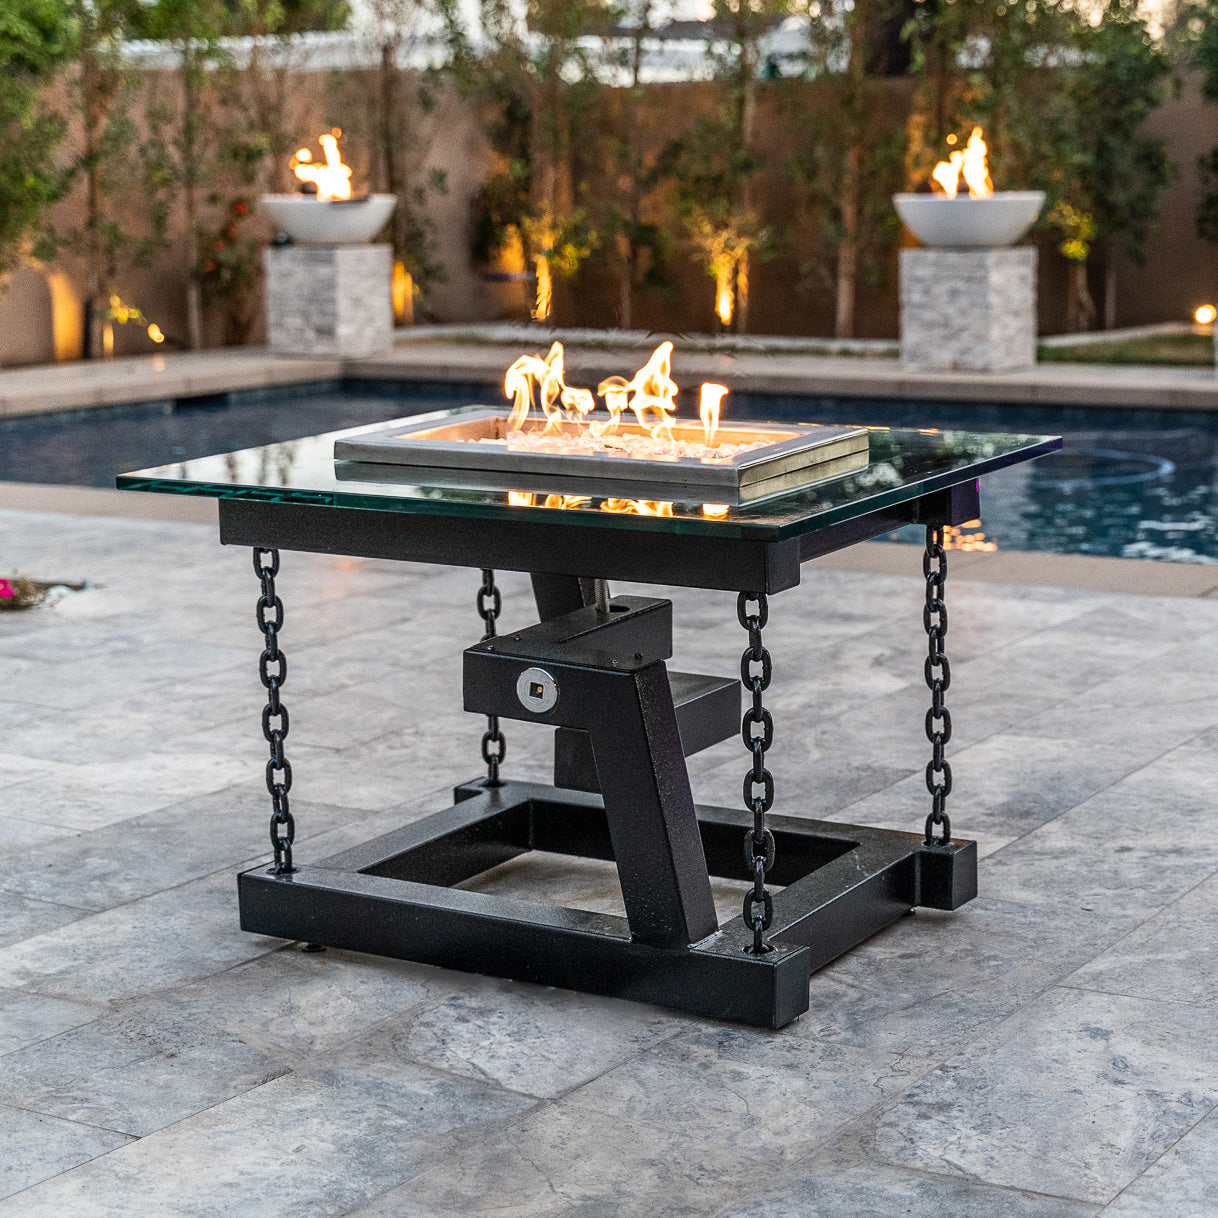 The Outdoor Plus Newton 52" Black Powder Coated Metal Liquid Propane Fire Pit with Chain Support & Match Lit Ignition